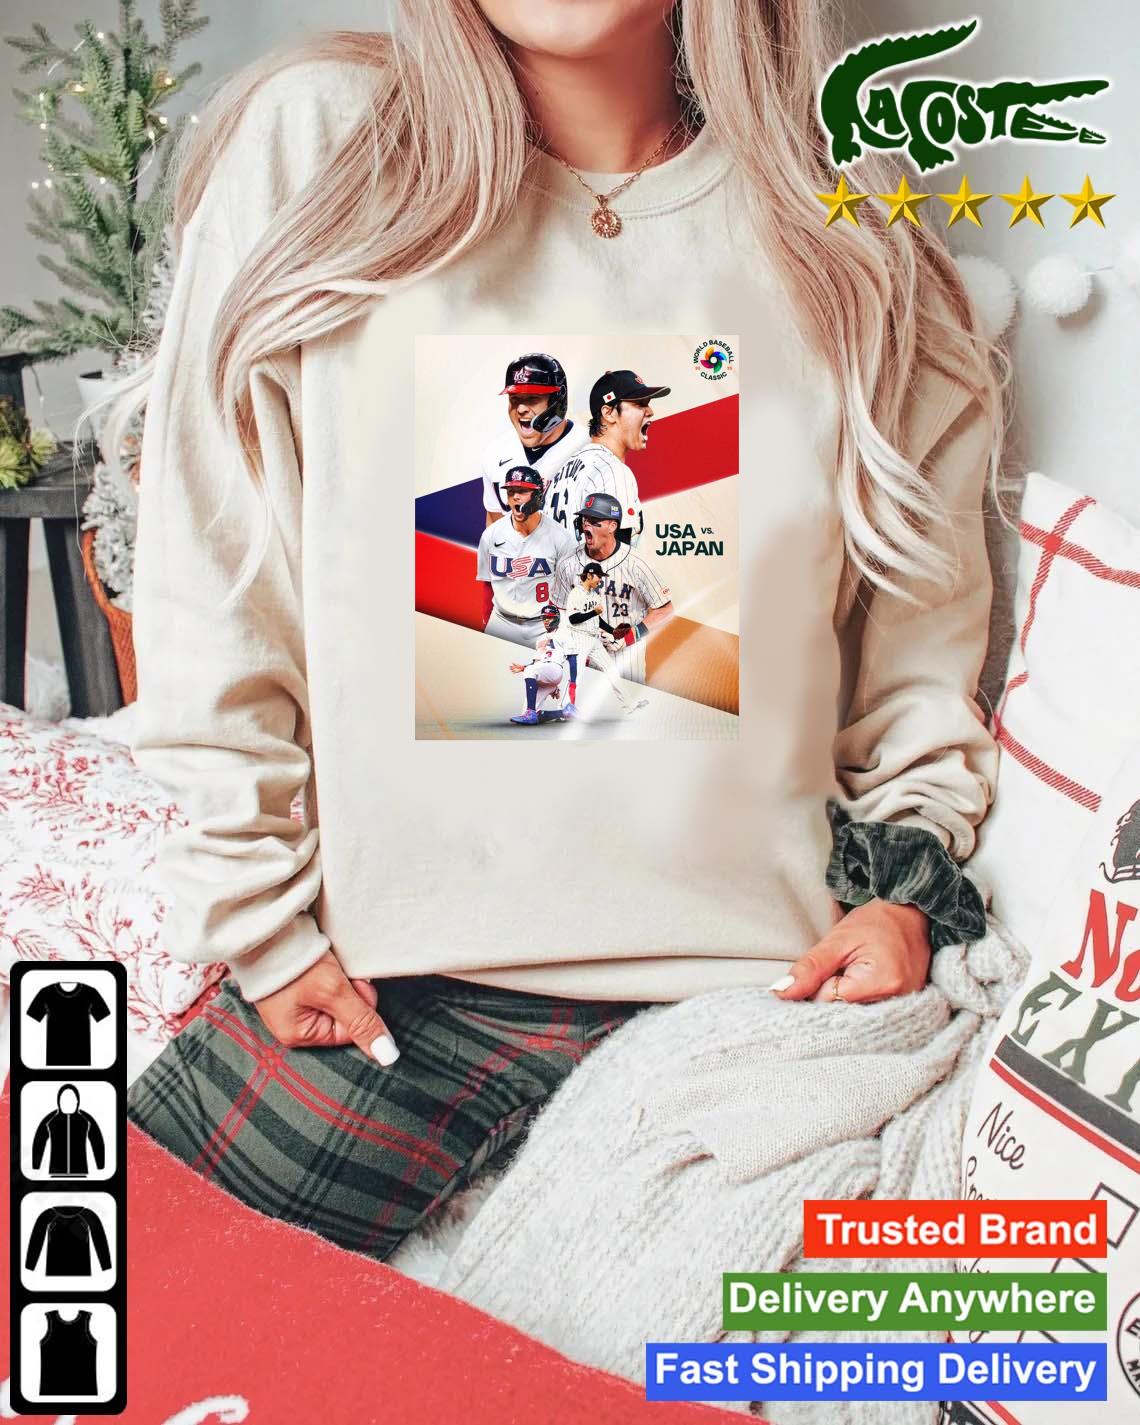 Will Team Usa Repeat Or Will Team Japan Go Undefeated For Its 3rd World Baseball Classic Sweats Mockup Sweater